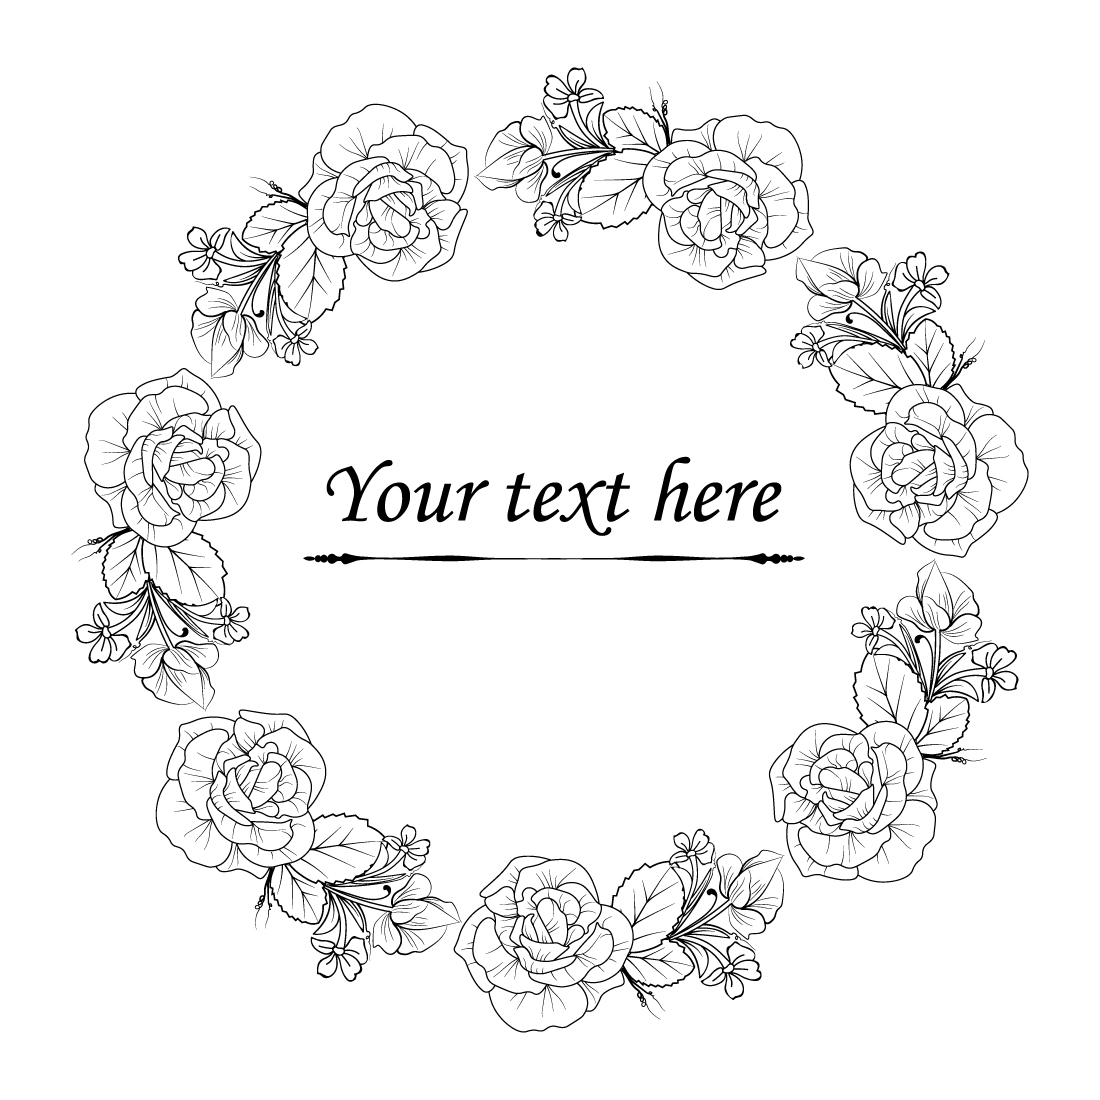 isolated outline drawing of rose flower, graphic - Stock Illustration  [85246104] - PIXTA